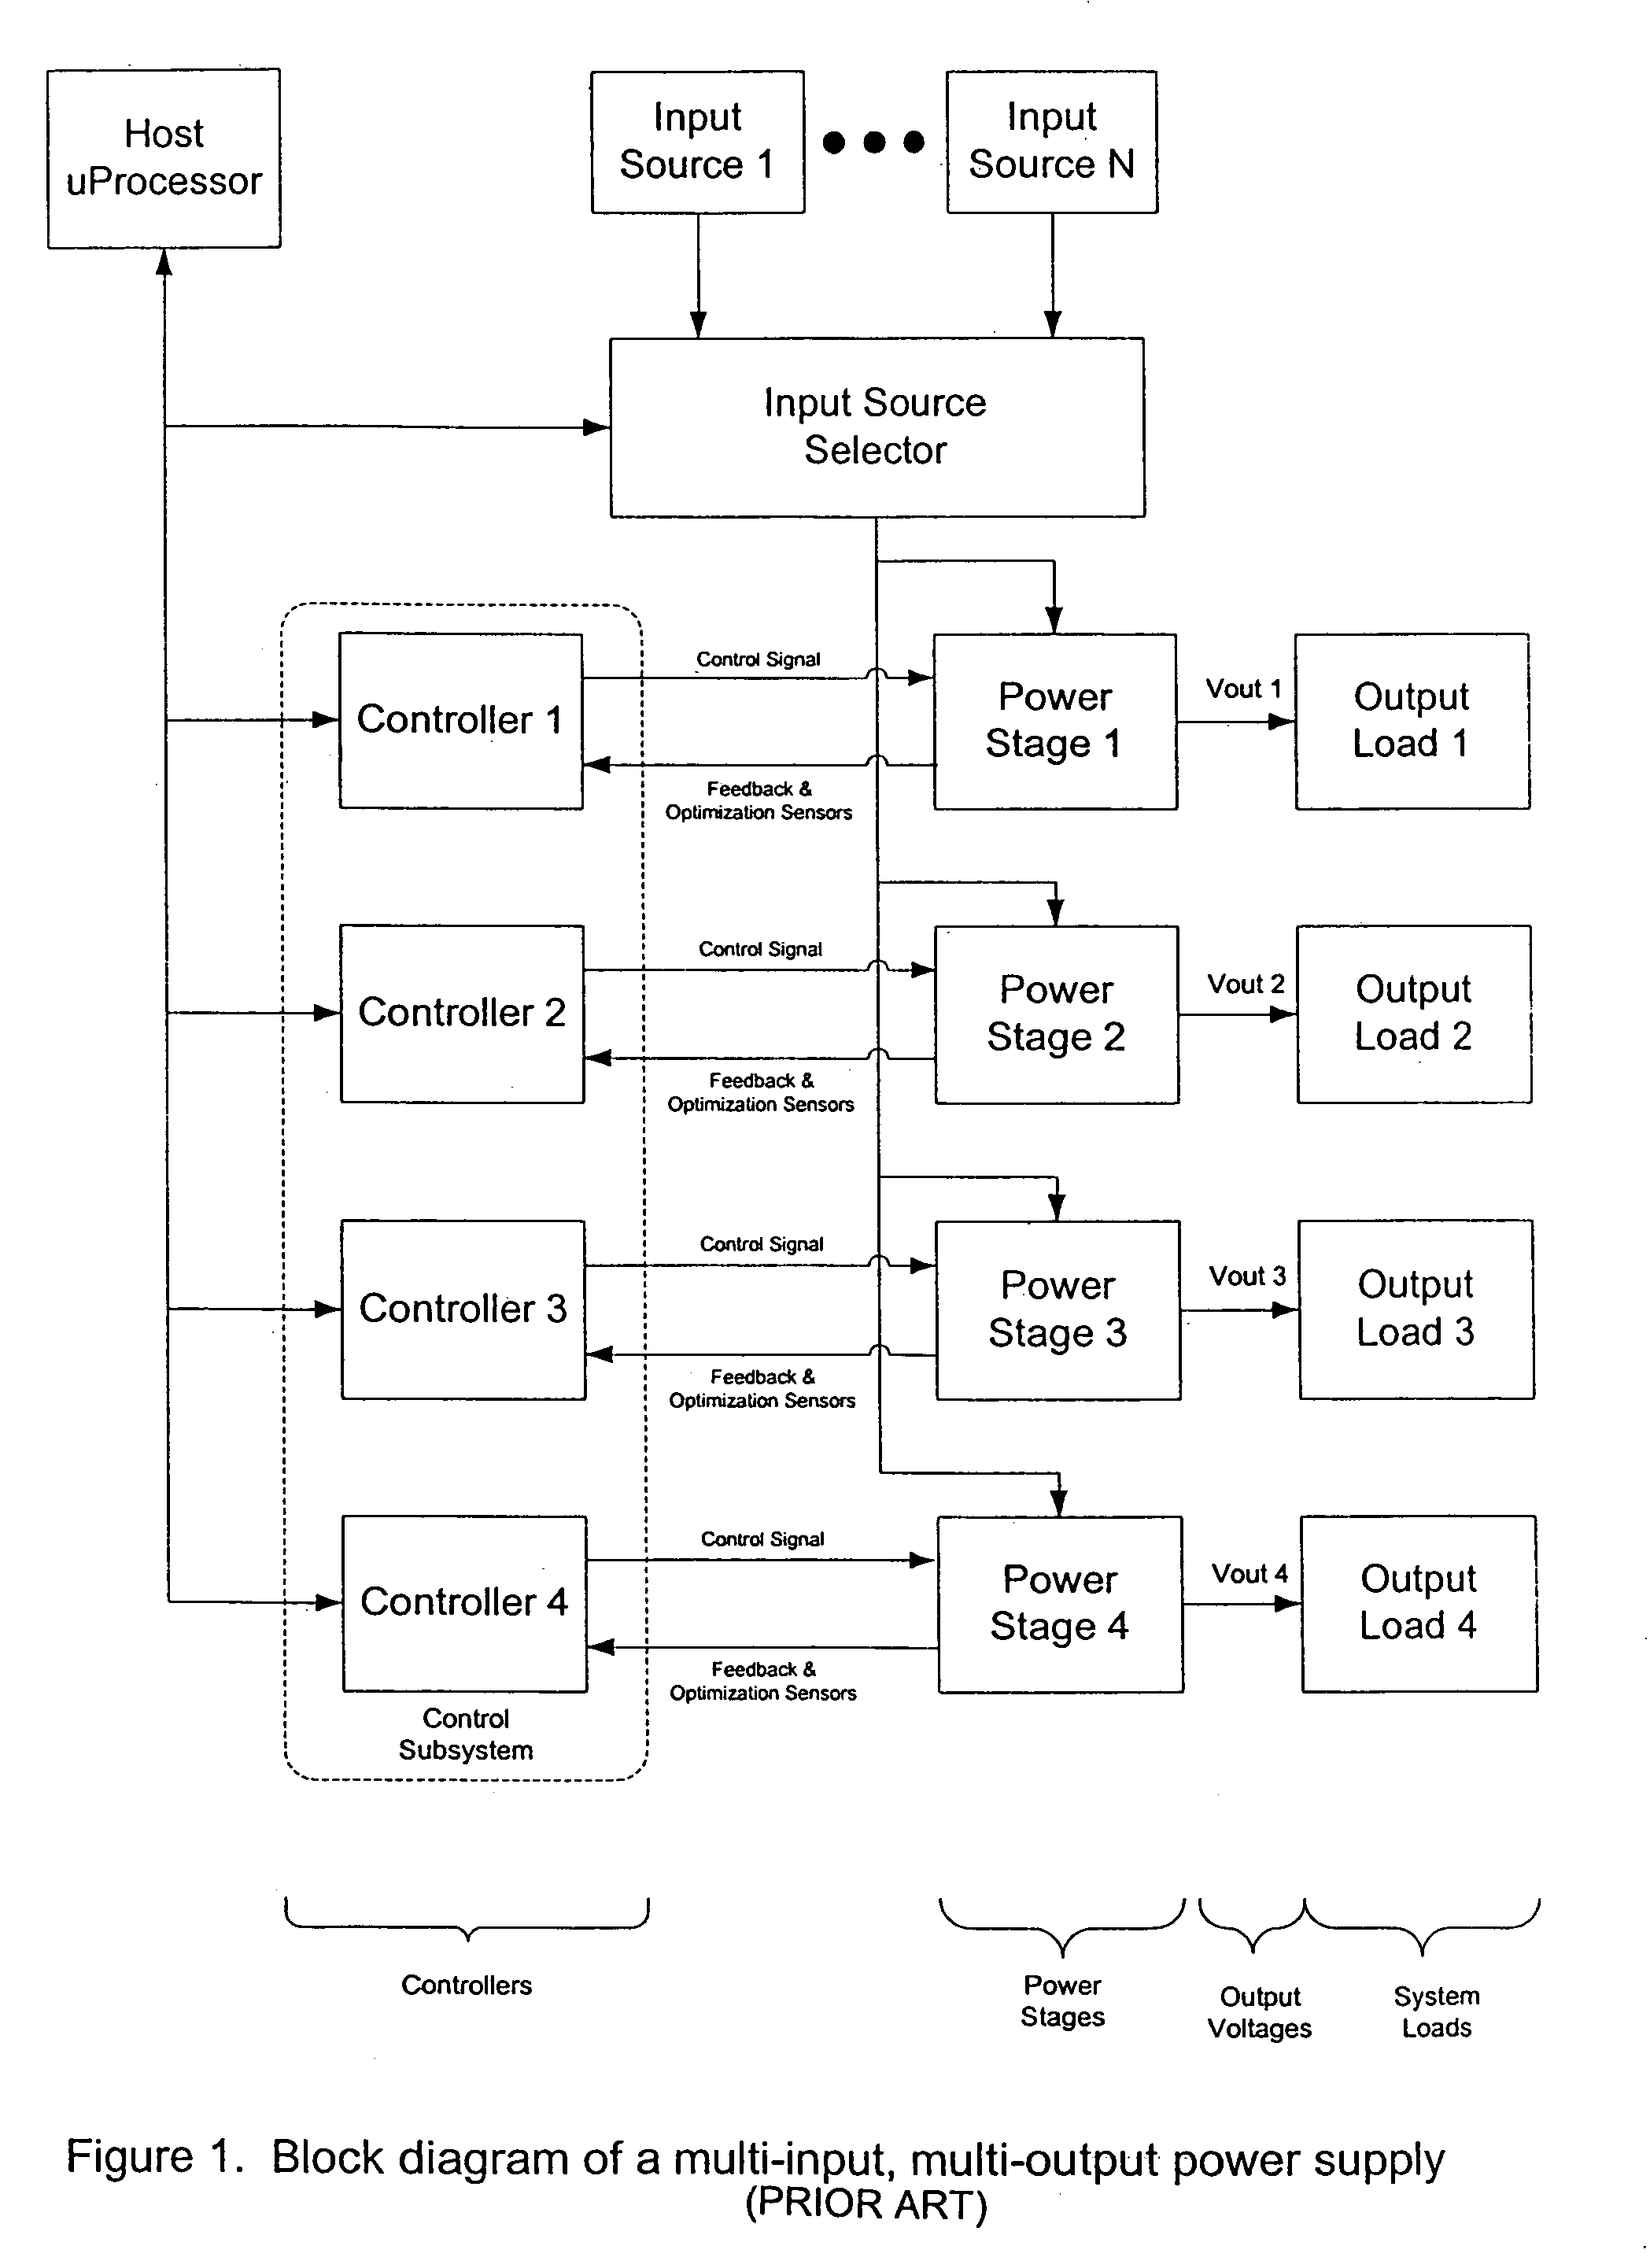 Multi-output power supply design system